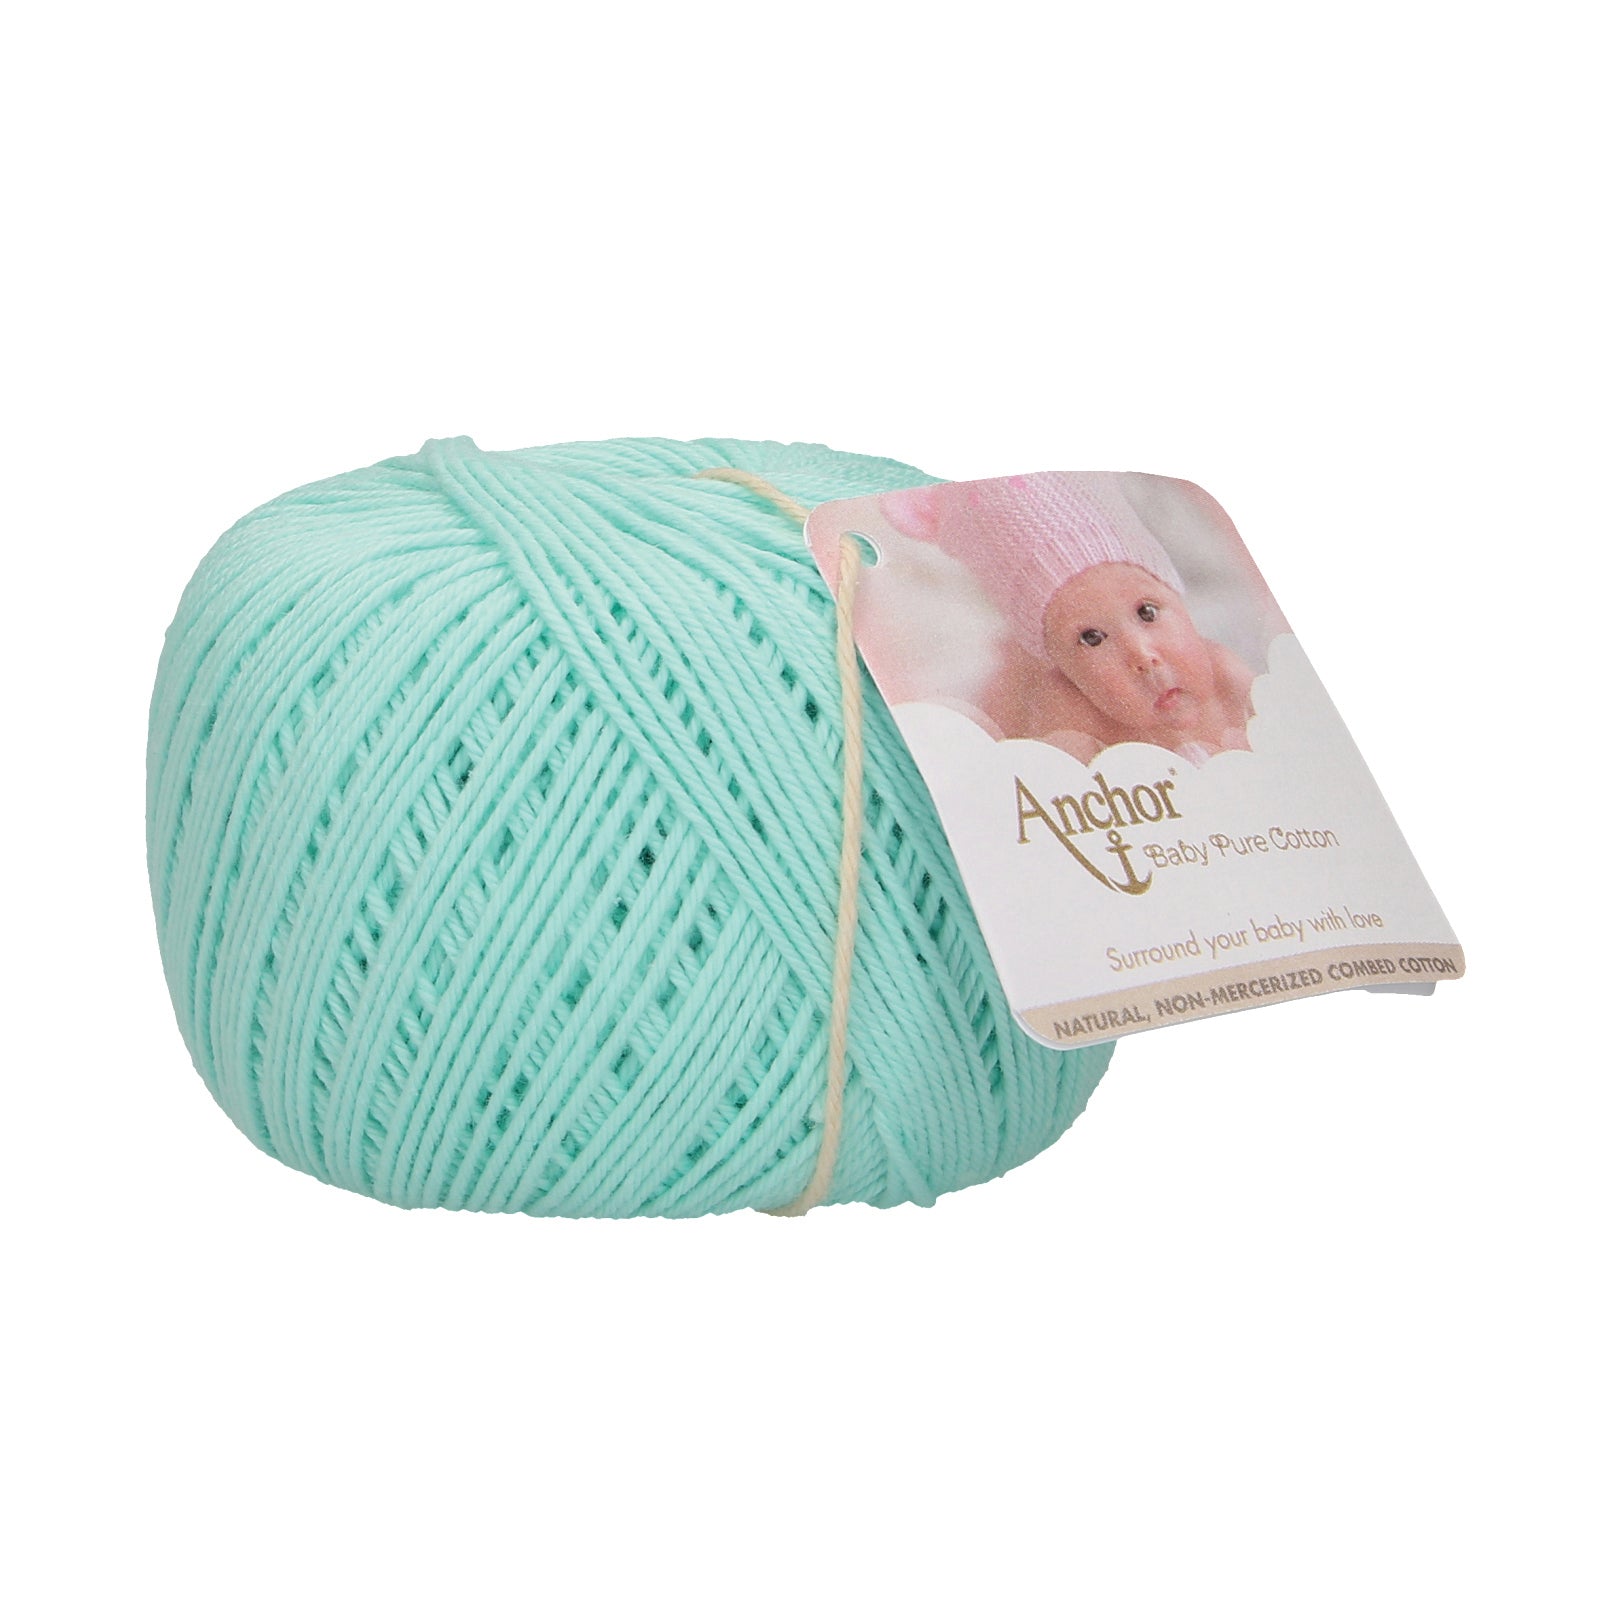 Anchor Baby Pure Cotton 4 ply Yarn 0385